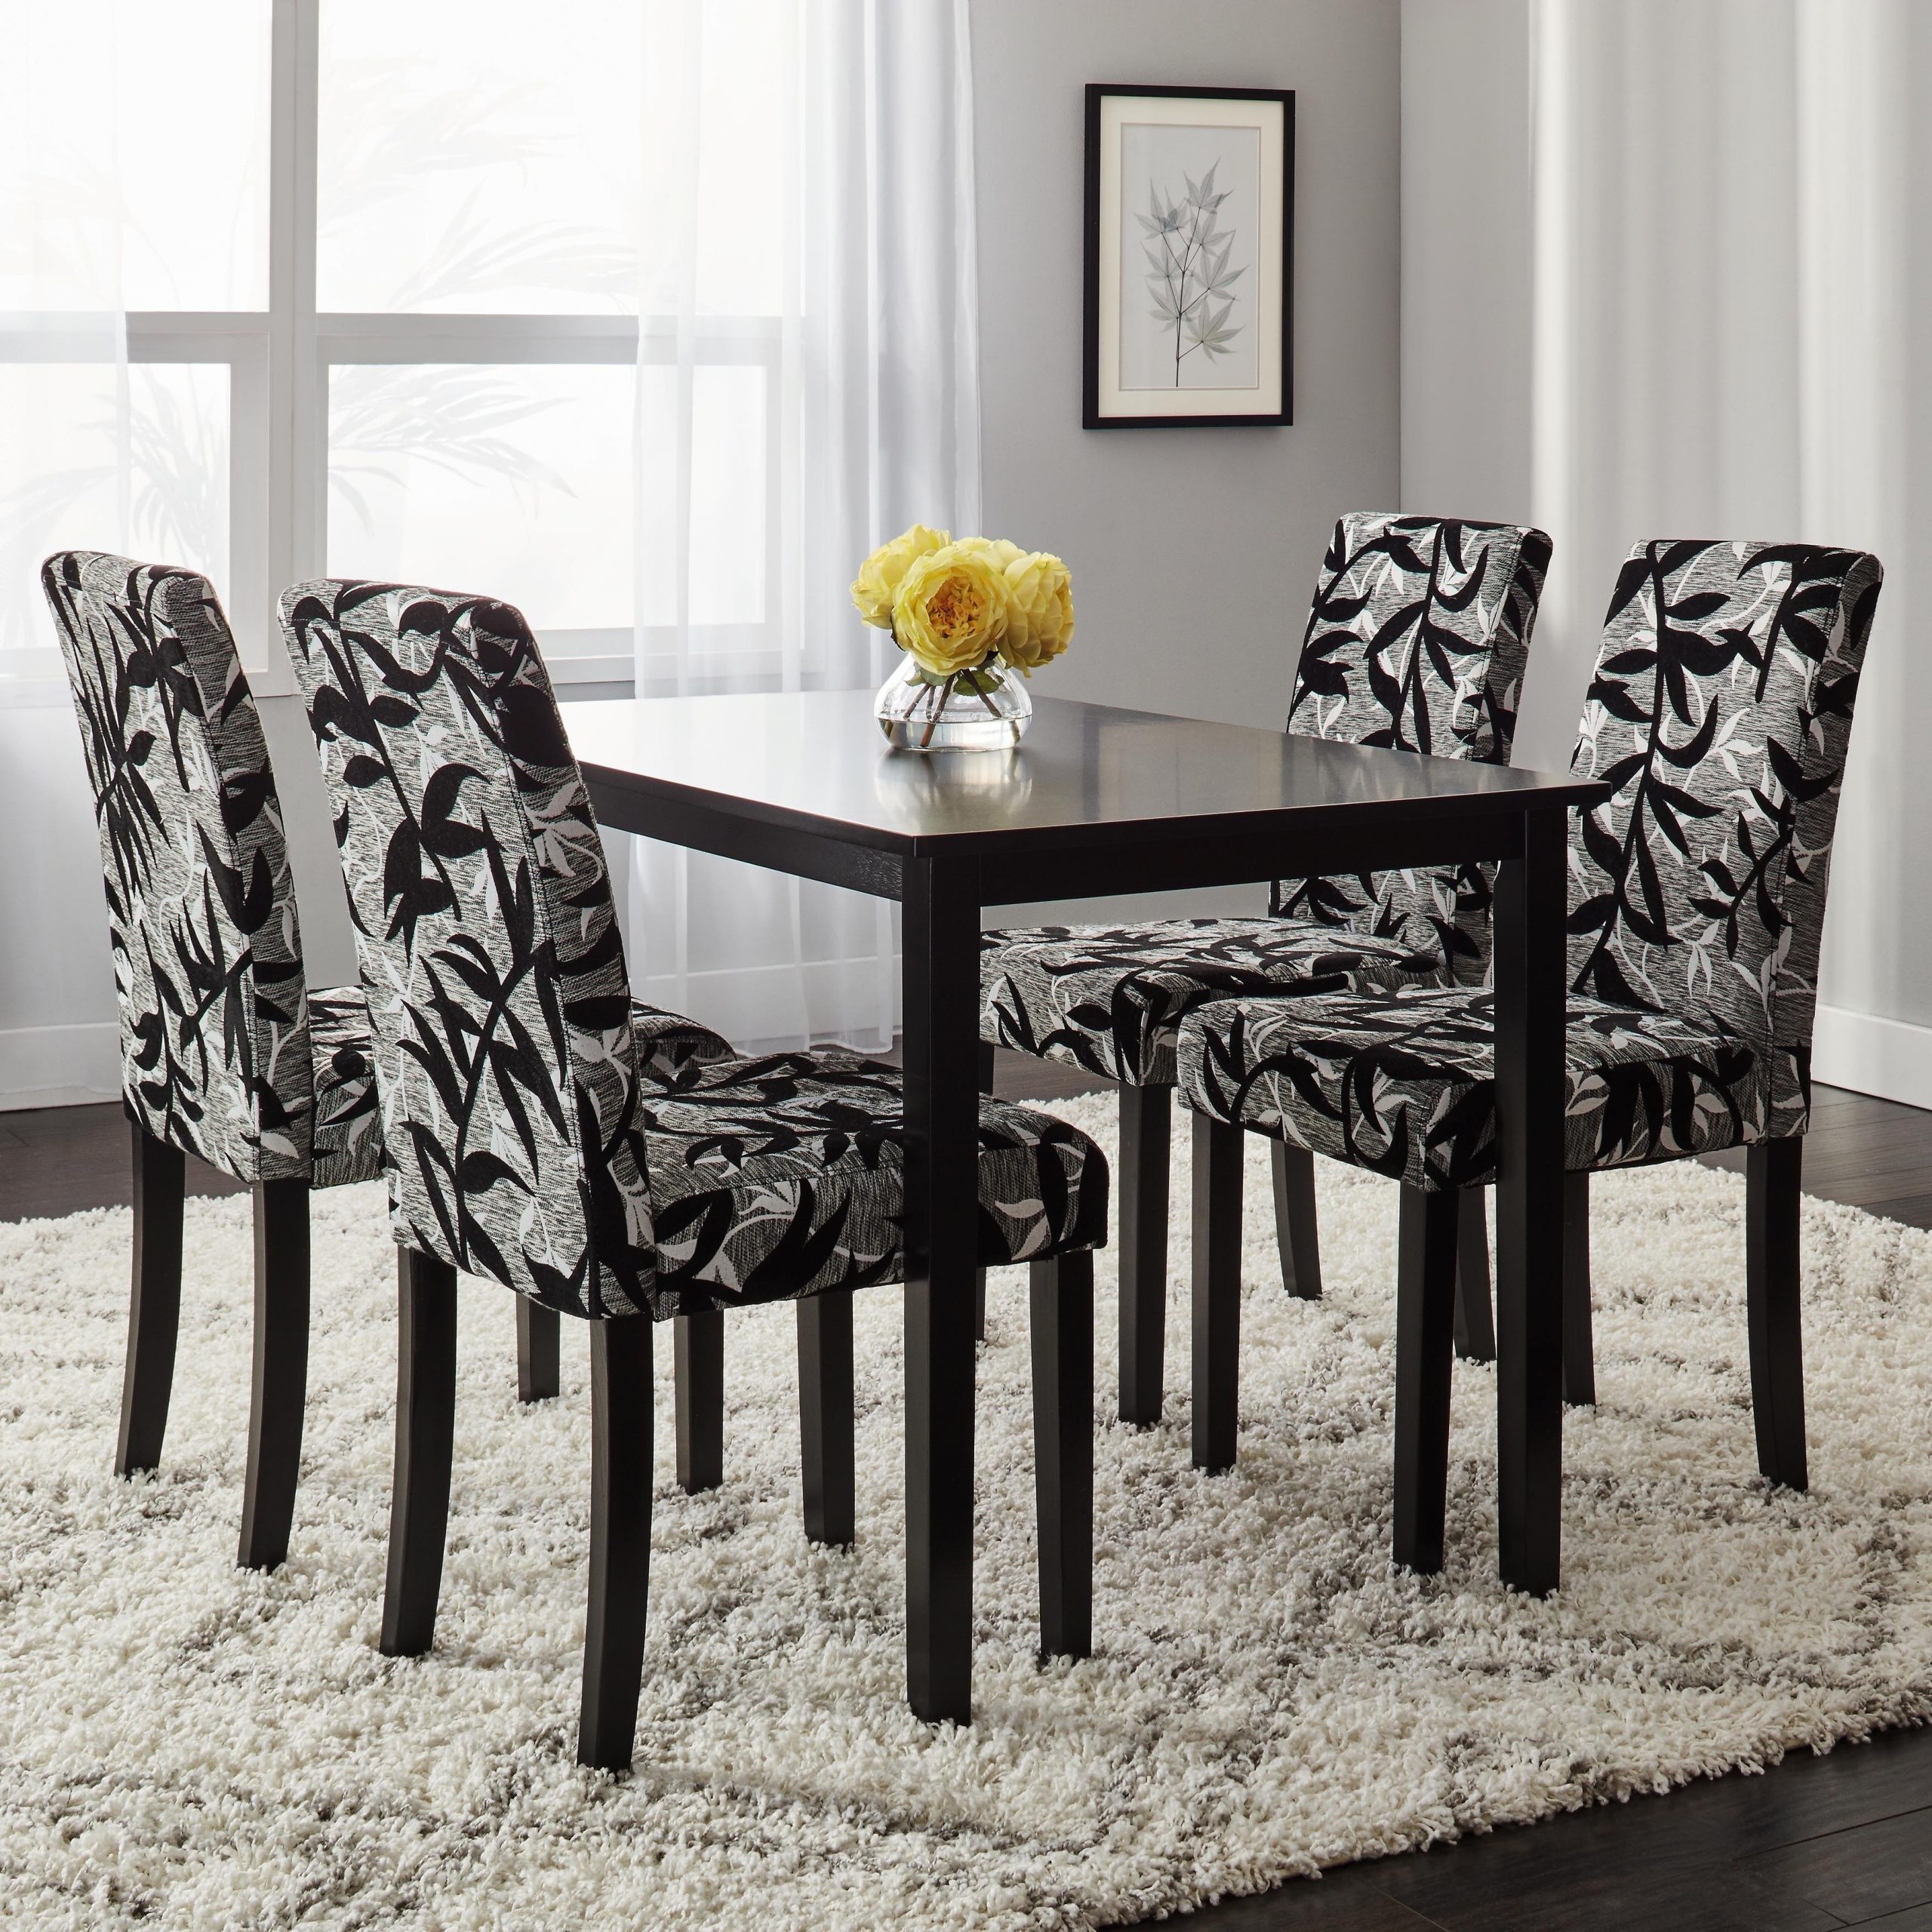 Chair Wondrous Kitchen Table And Chair Sets With pertaining to dimensions 3500 X 3500